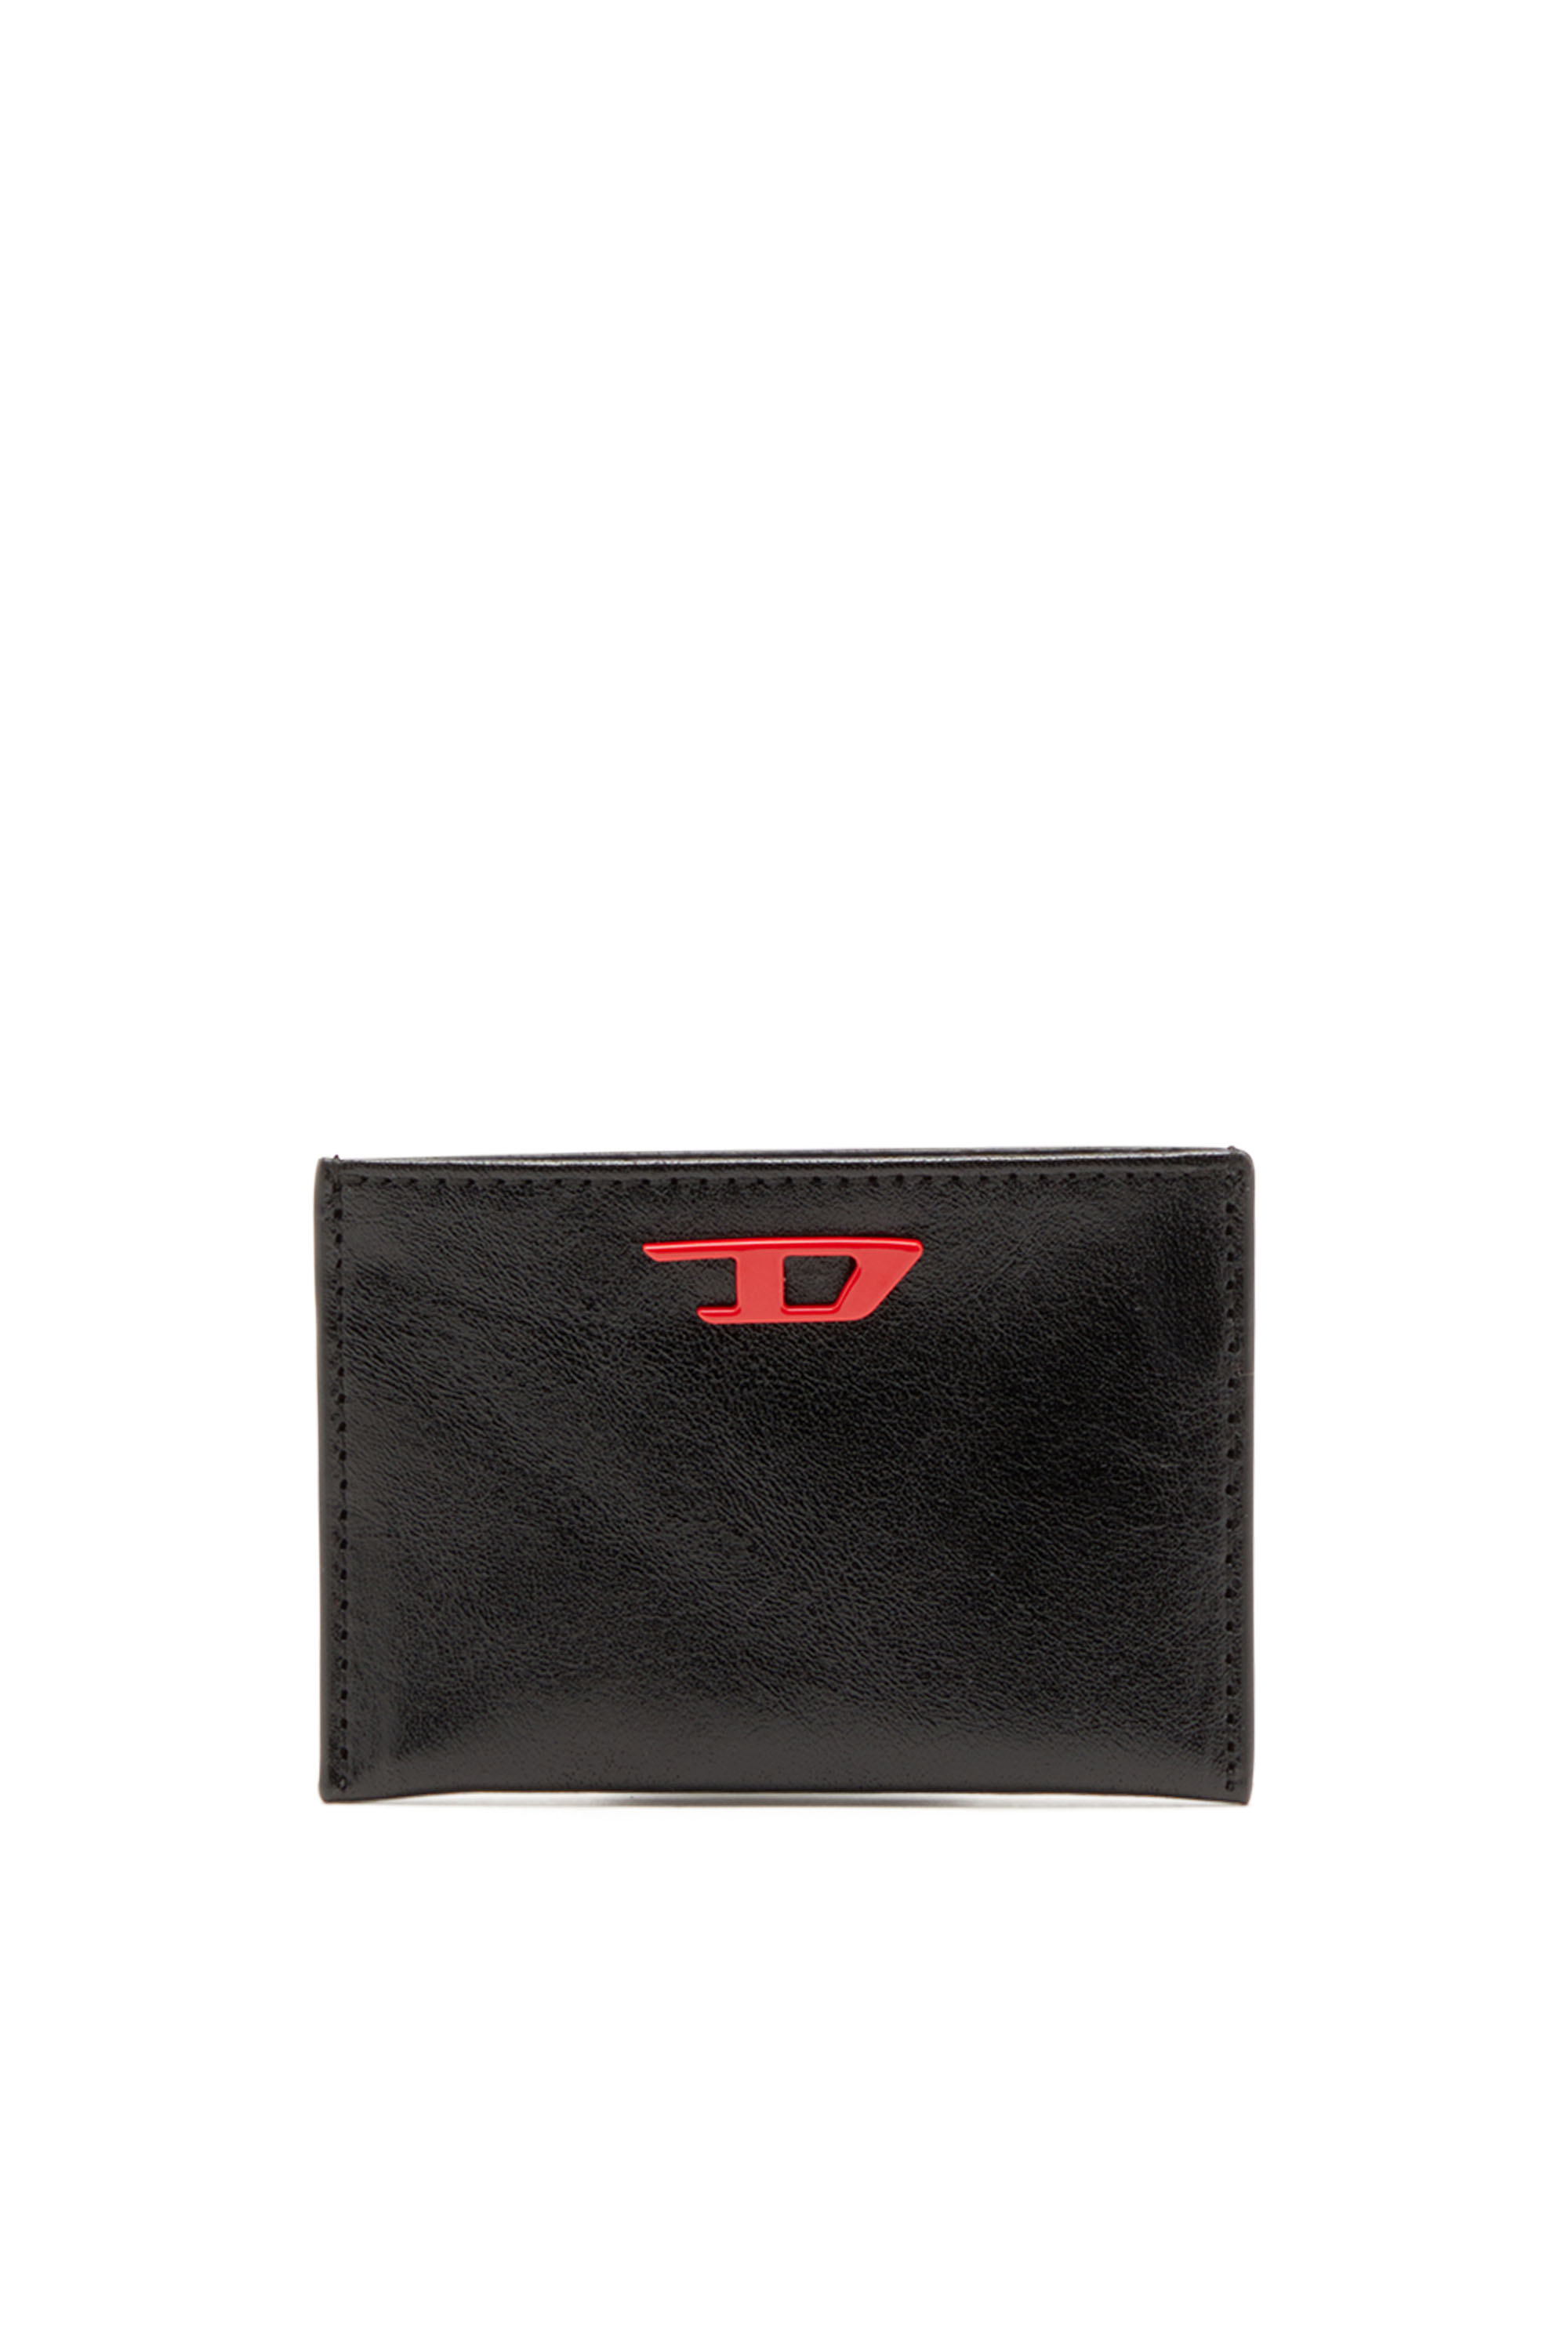 Diesel - Leather card holder with red D plaque - Small Wallets - Man - Black